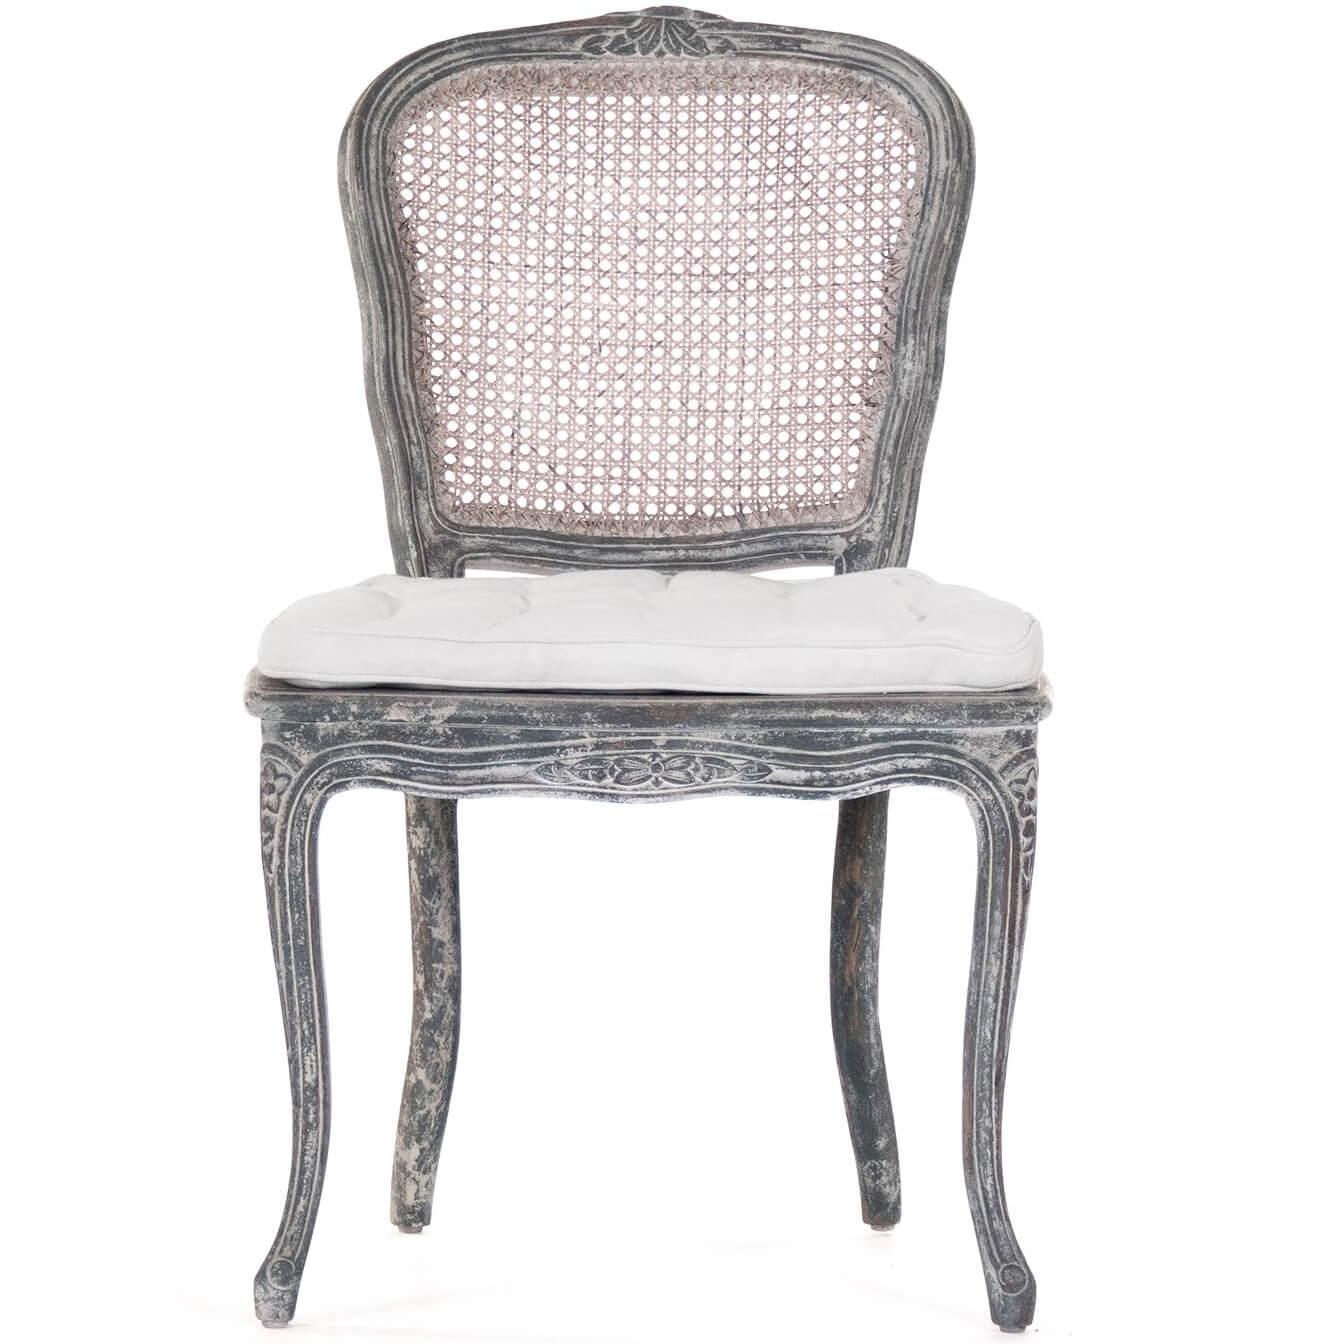 French Gray Annette Side Chairs - Belle Escape